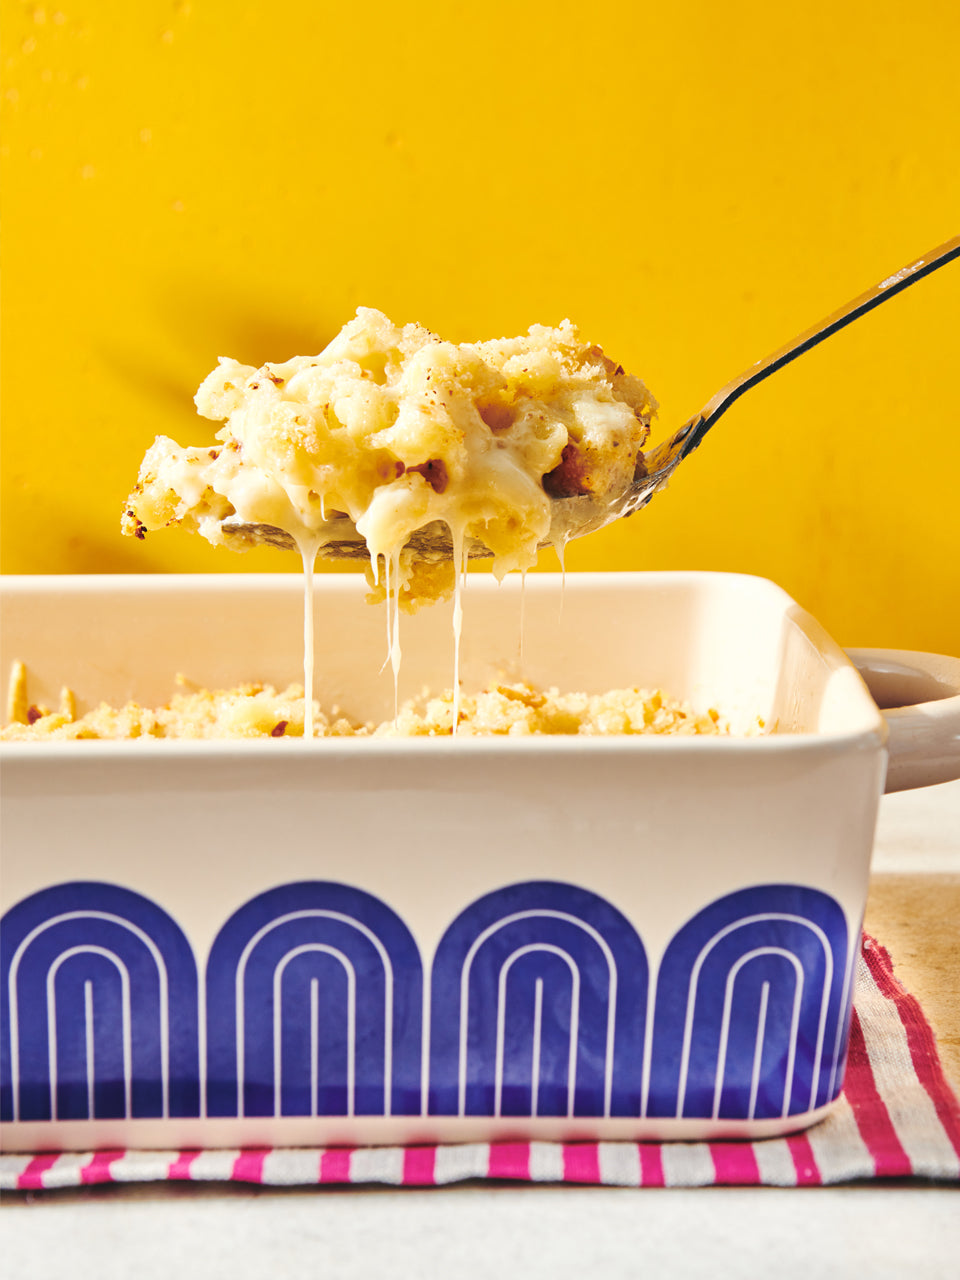 Baked Macaroni and Cheese – Cabot Creamery